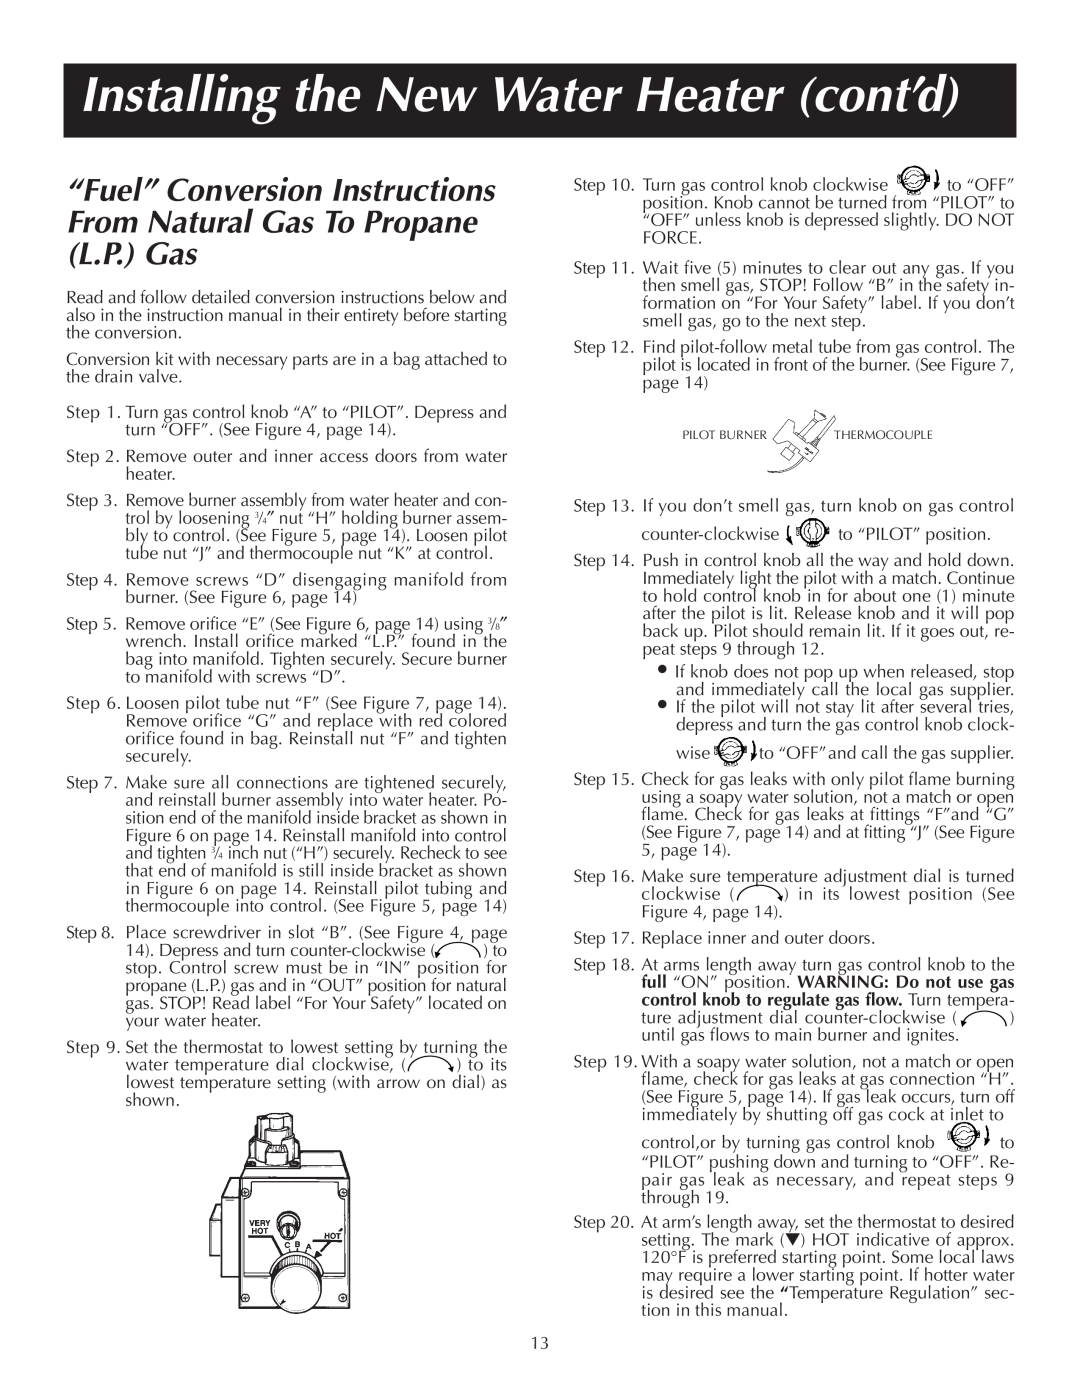 Reliance Water Heaters 184123-000 instruction manual “Fuel” Conversion Instructions, From Natural Gas To Propane L.P. Gas 